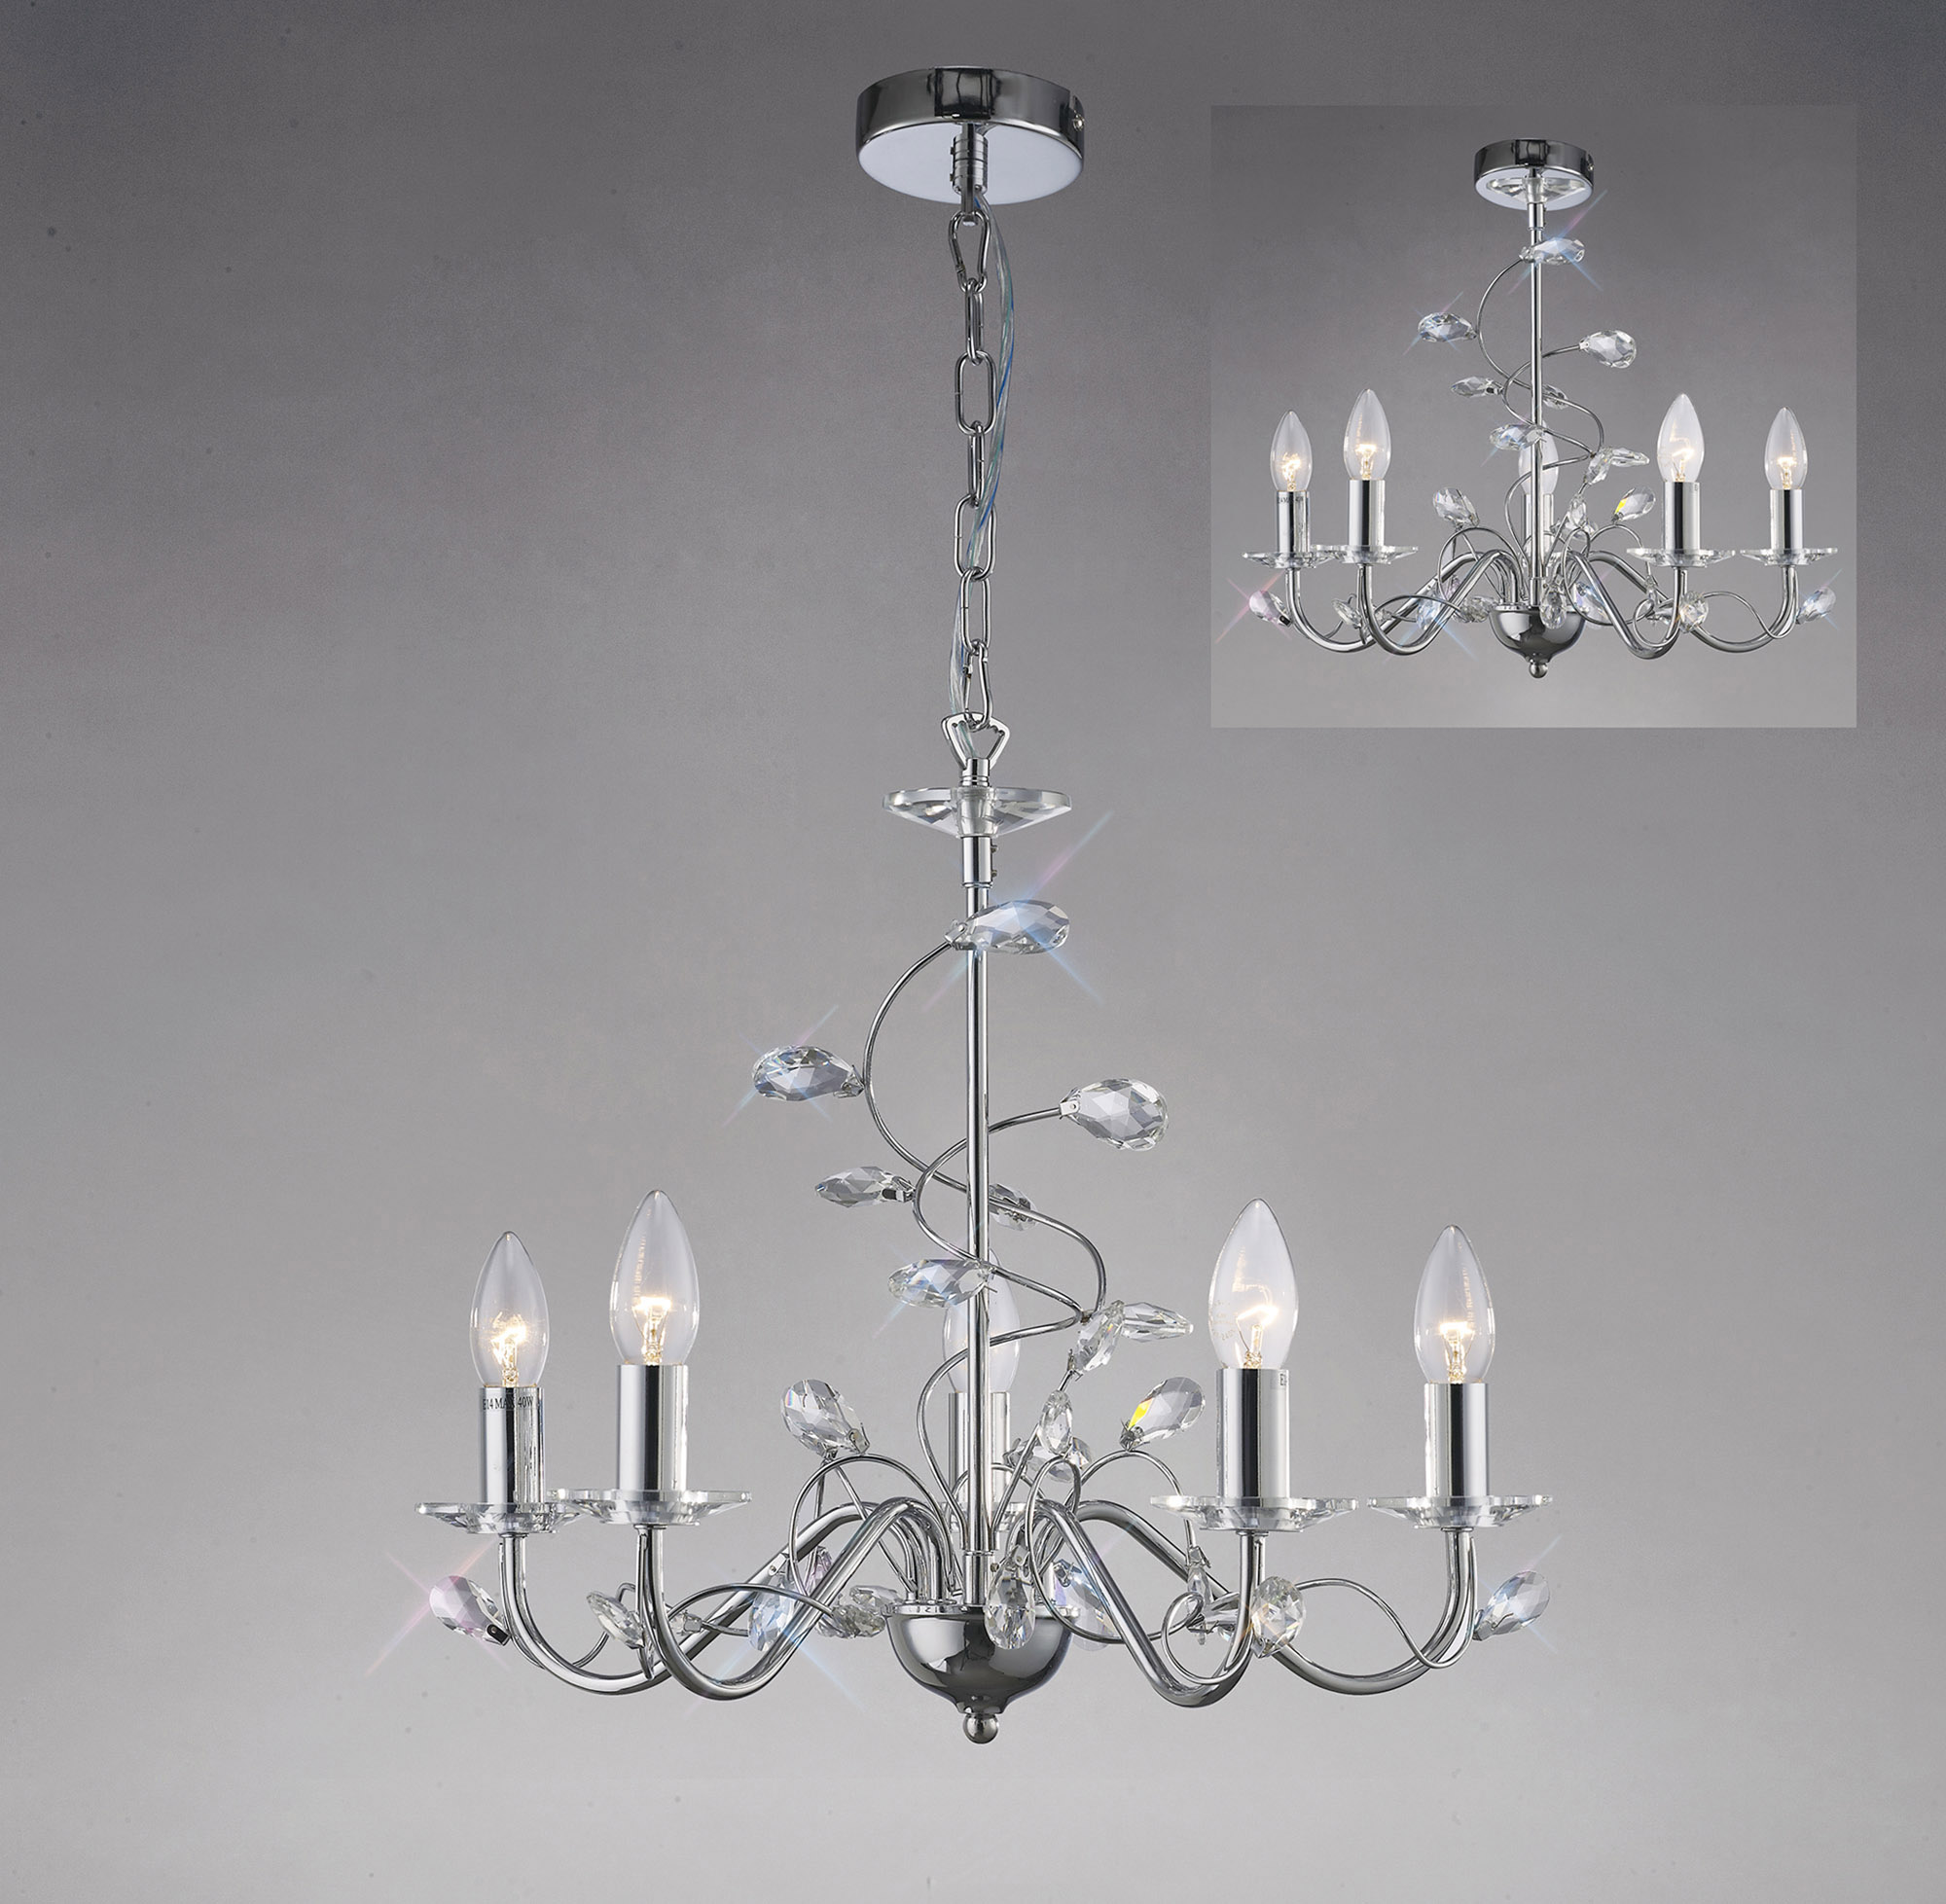 IL31215  Willow Crystal Pendant 5 Light Without Shade Polished Chrome